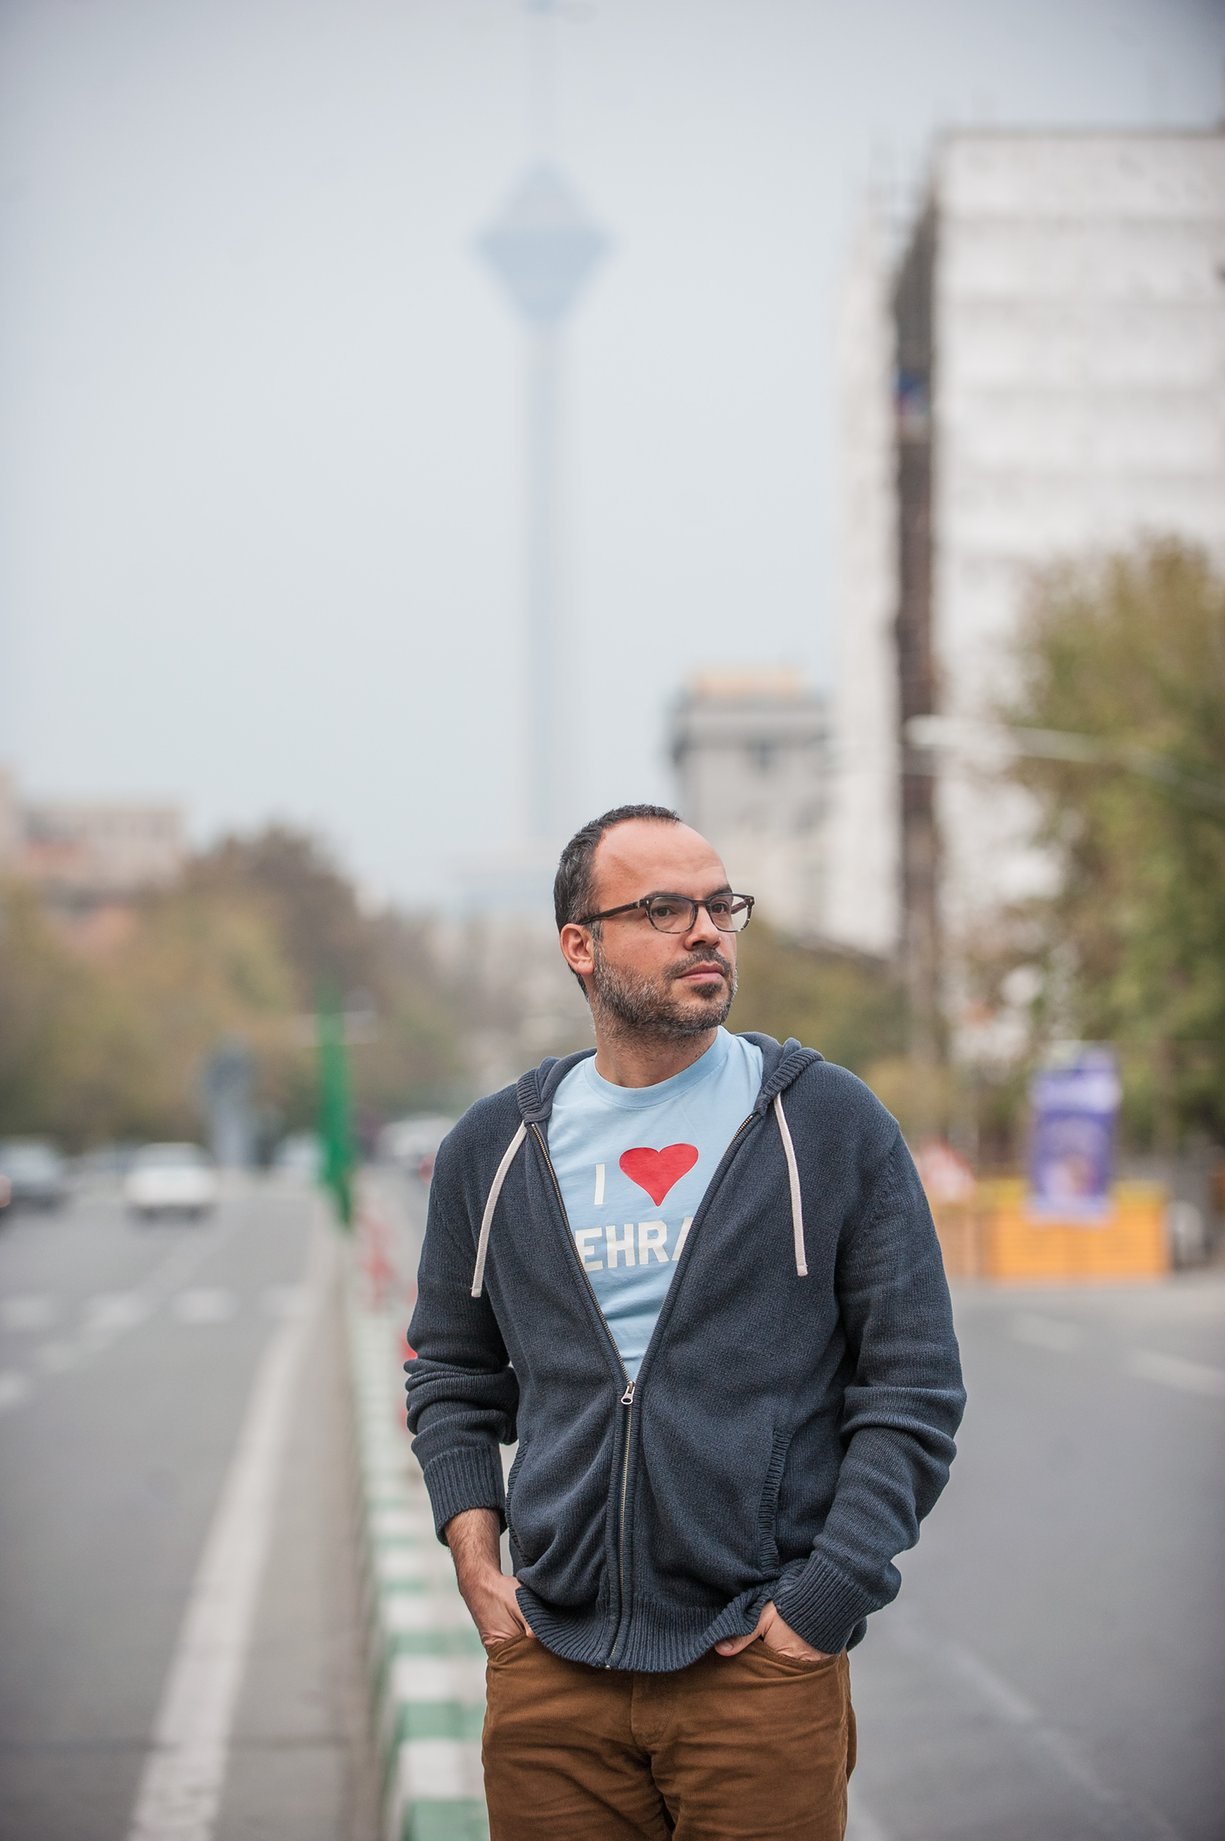 ‘The centralisation of information is making us all much less powerful’ … Iranian blogger Hossein Derakhshan, who was imprisoned for six years. Photograph: Arash Ashoorinia for the Guardian 